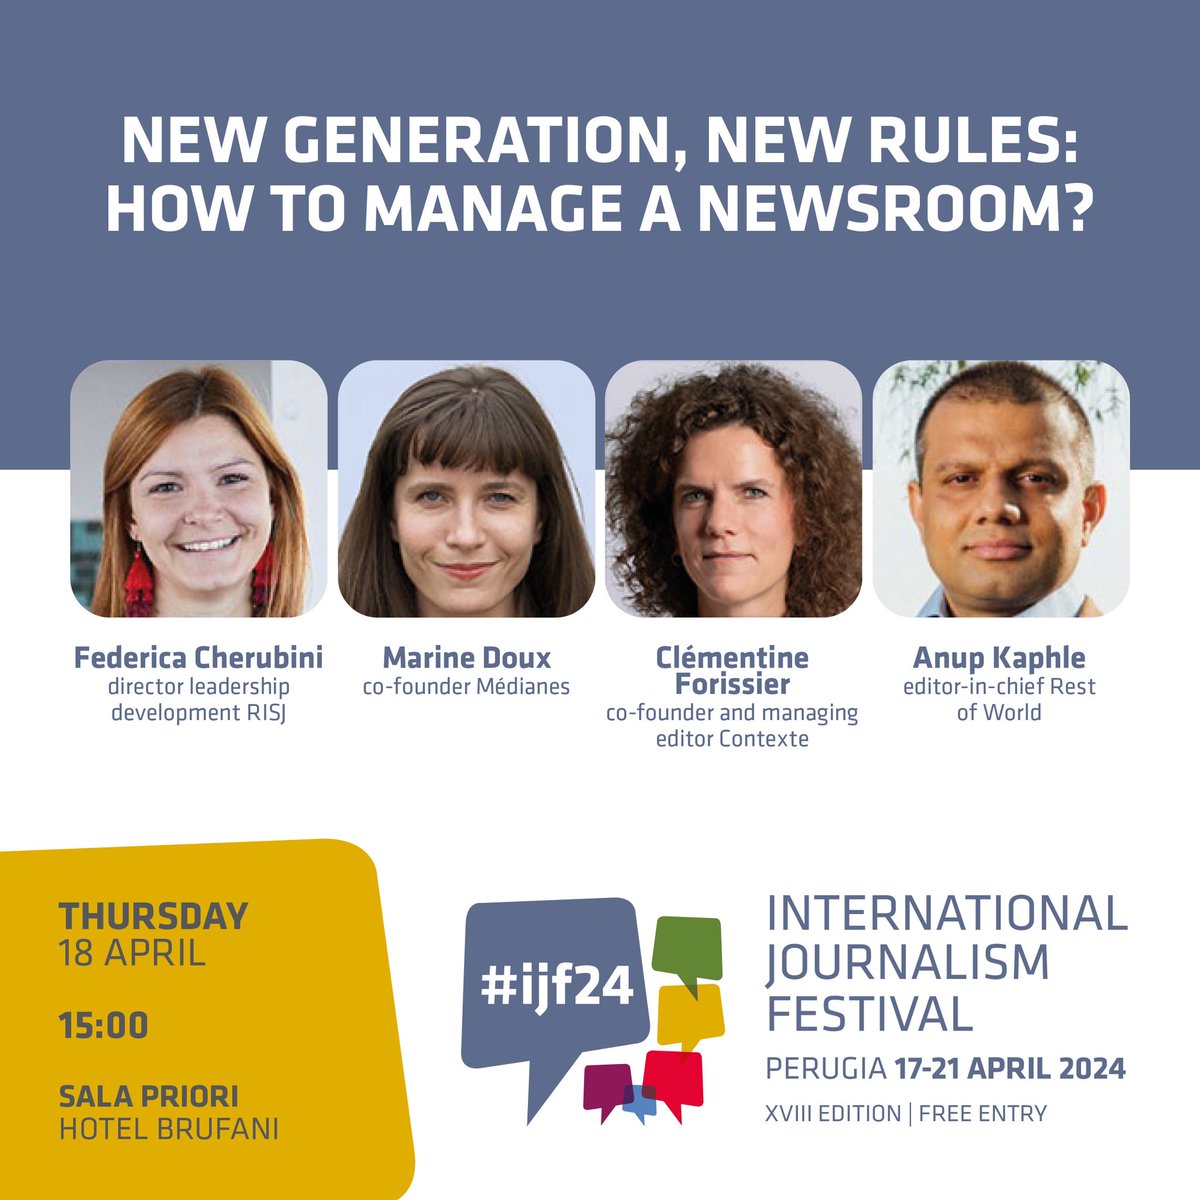 🔴SAVE THE DATE! 'New generation, new rules: how to manage a newsroom?' #ijf24 with  @fedecherubini @MarineDoux @cforissier @AnupKaphle 🎥Live & On Demand > on Thu, Apr 18th journalismfestival.com/programme/2024…